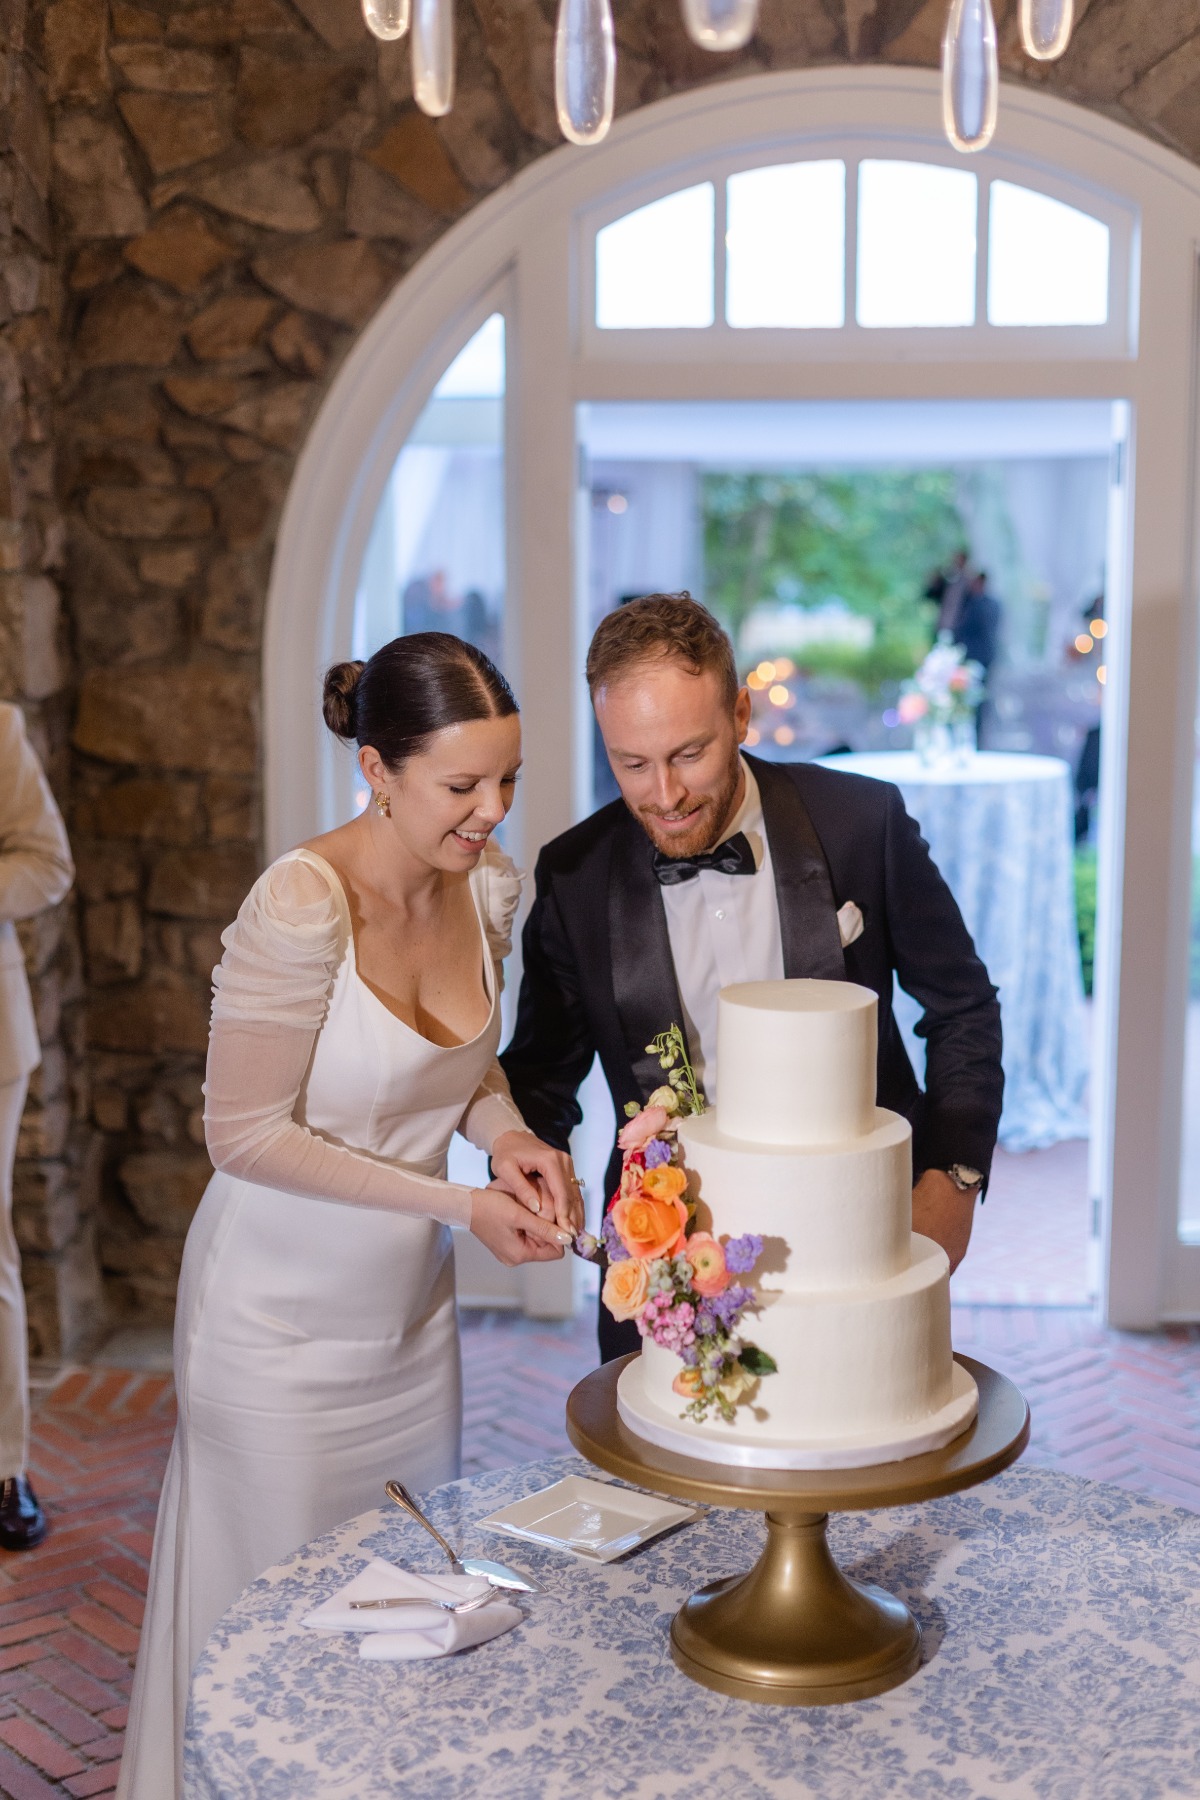 Bride and groom cutting floral cake 